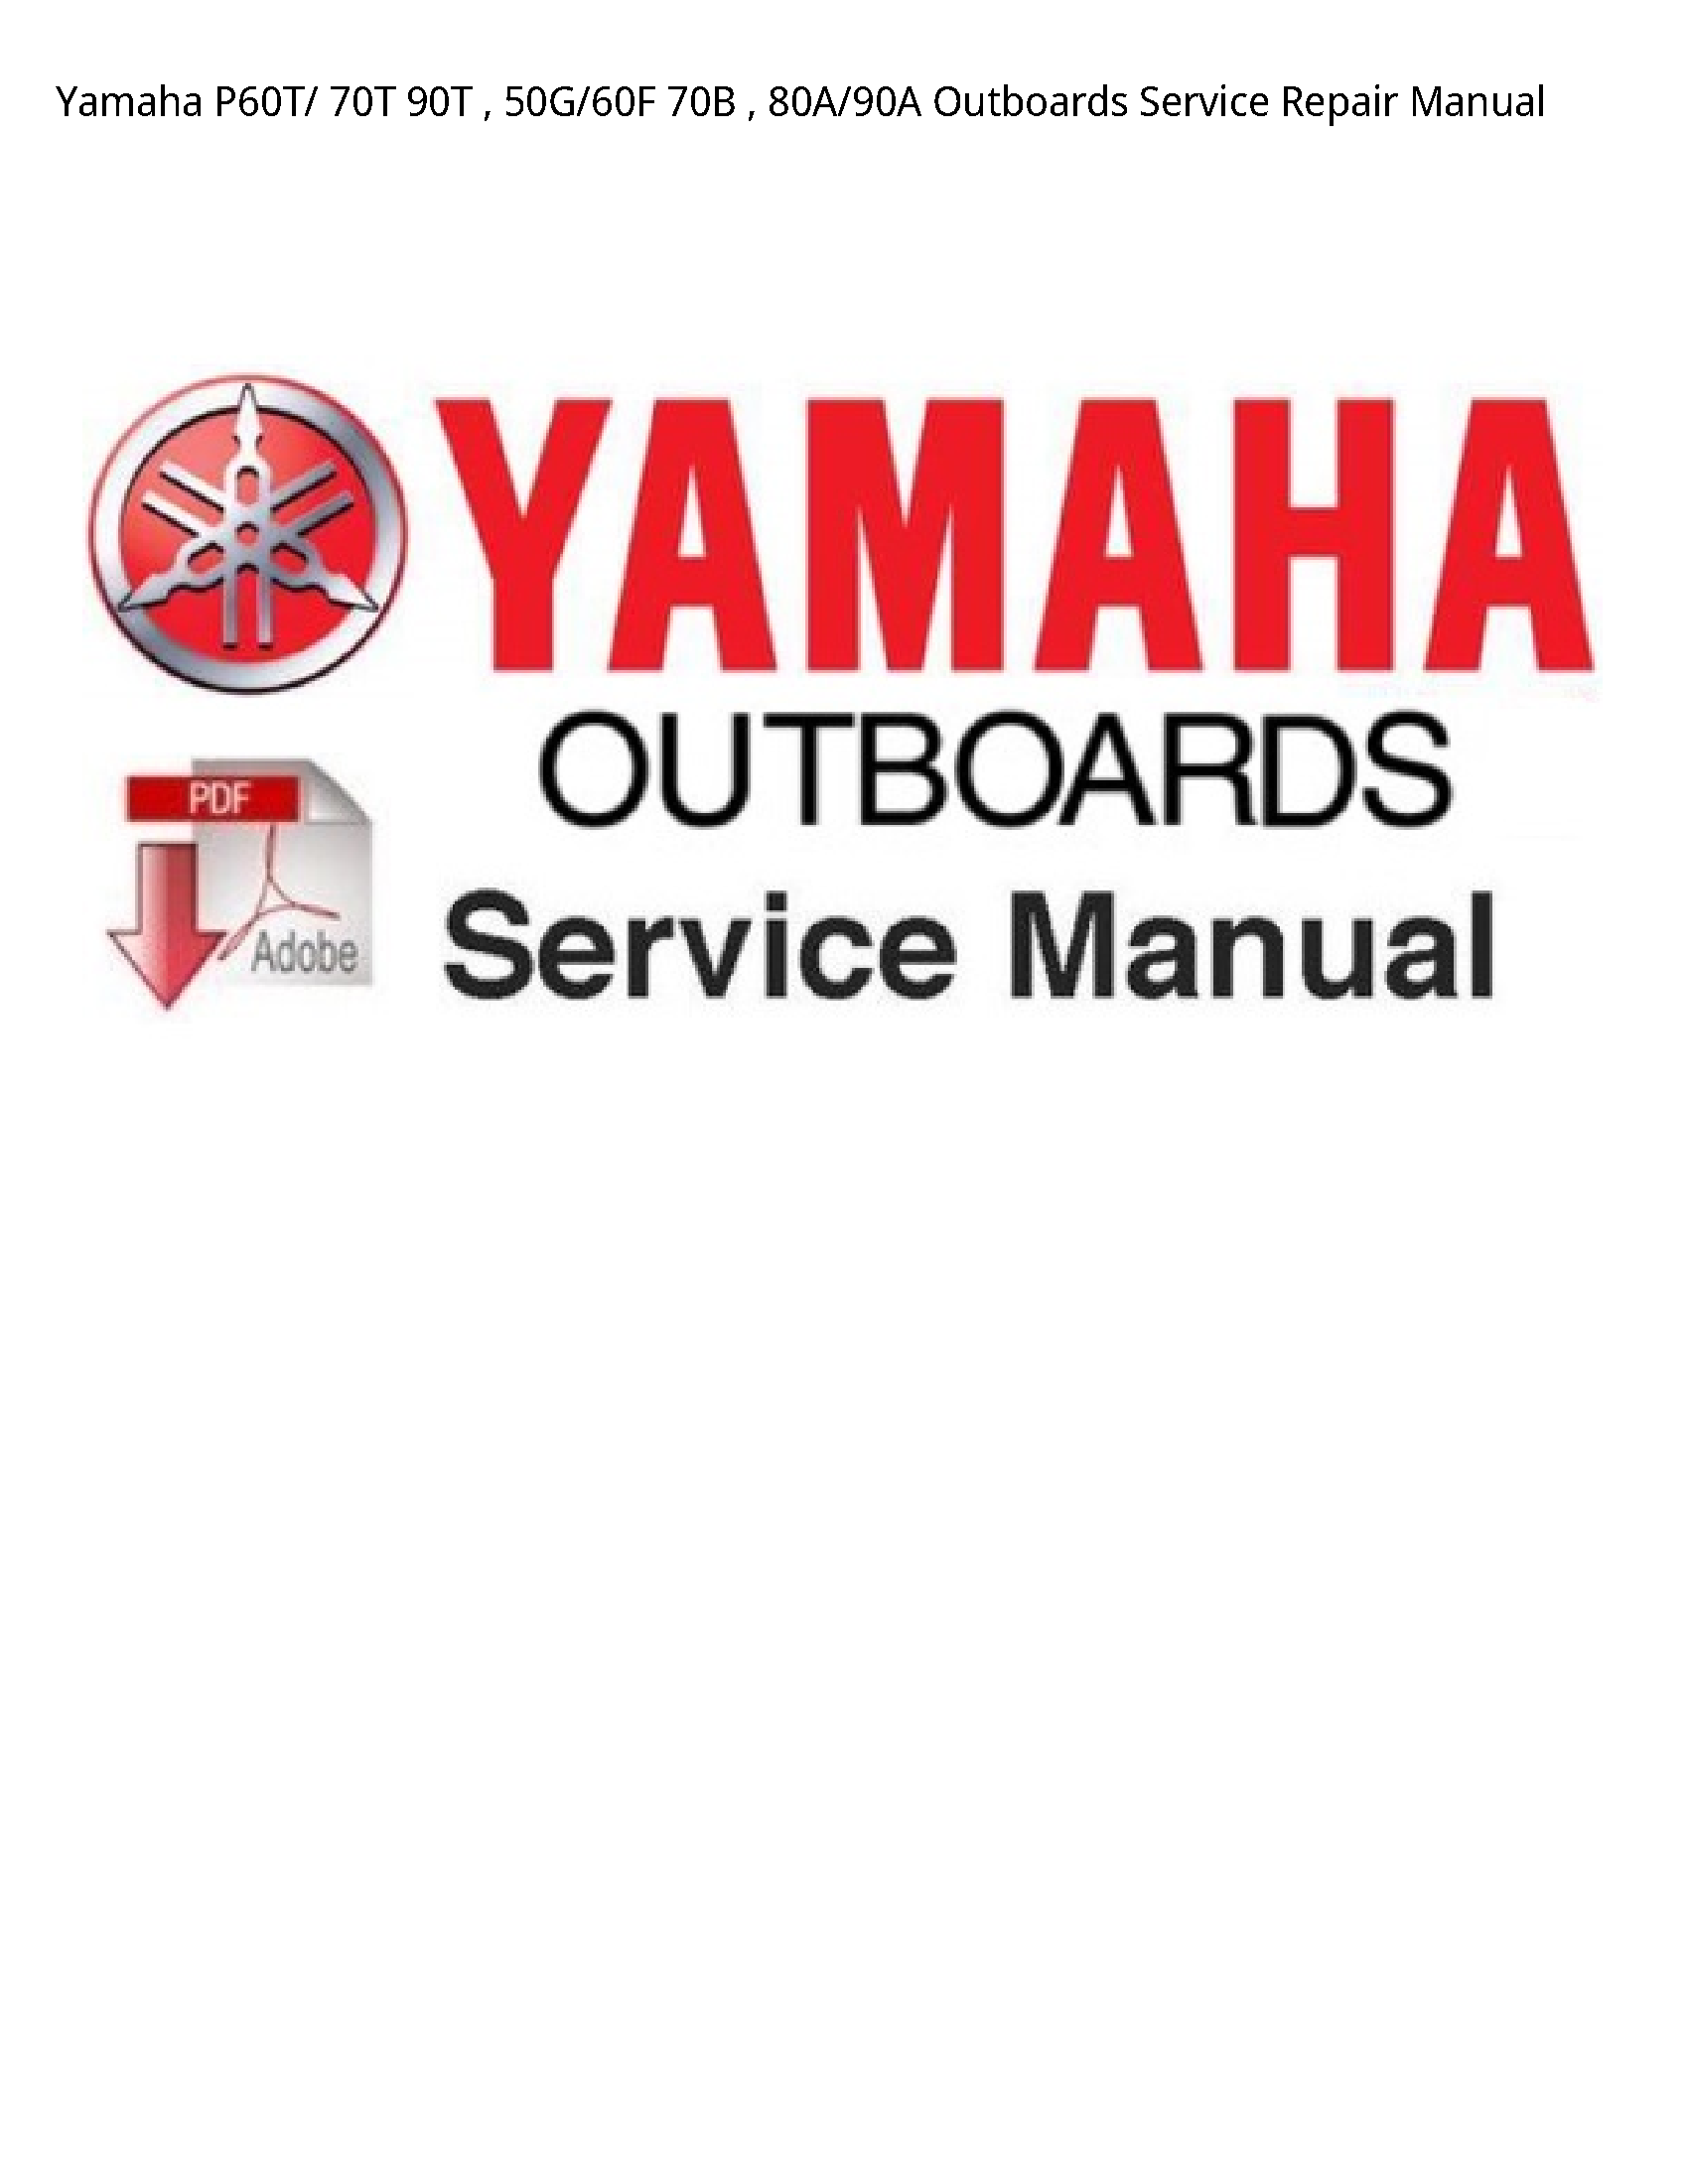 Yamaha P60T Outboards manual